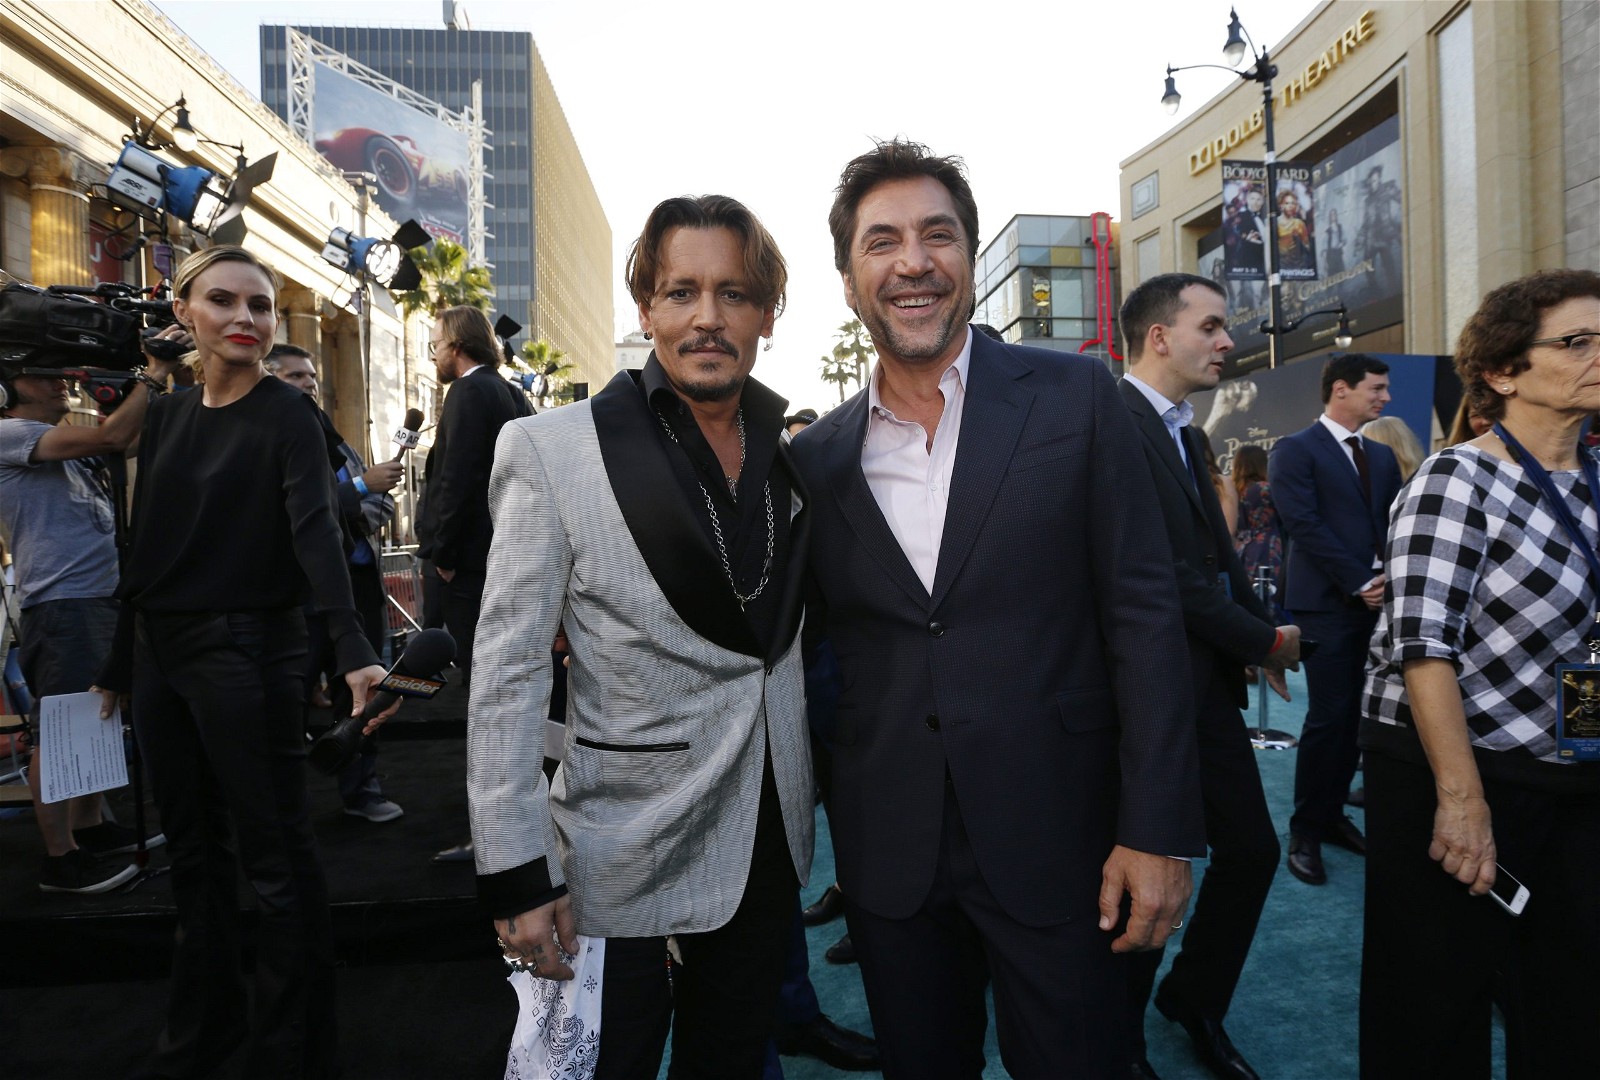 Johnny Depp and Javier Bardem at the premiere of Pirates of the Caribbean: Dead Men Tell No Tales